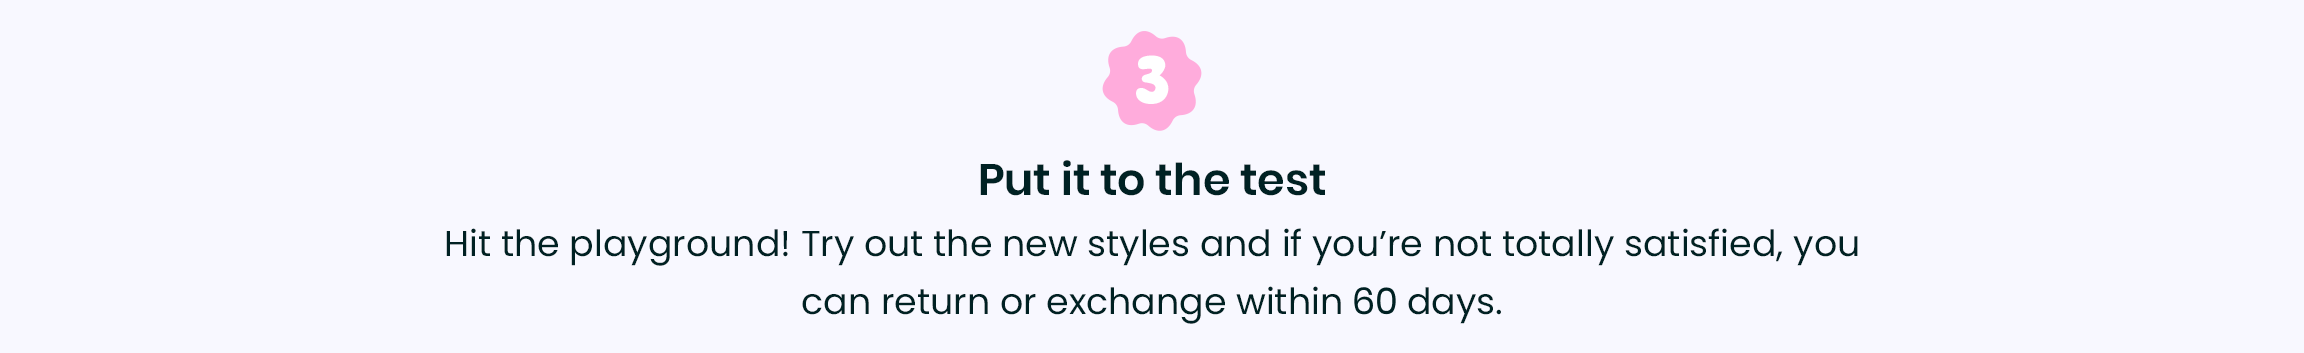 3. Put it to the test - Hit the playground! Try out the new styles and if youâ€™re not totally satisfied, you can return or exchange within 30 days.